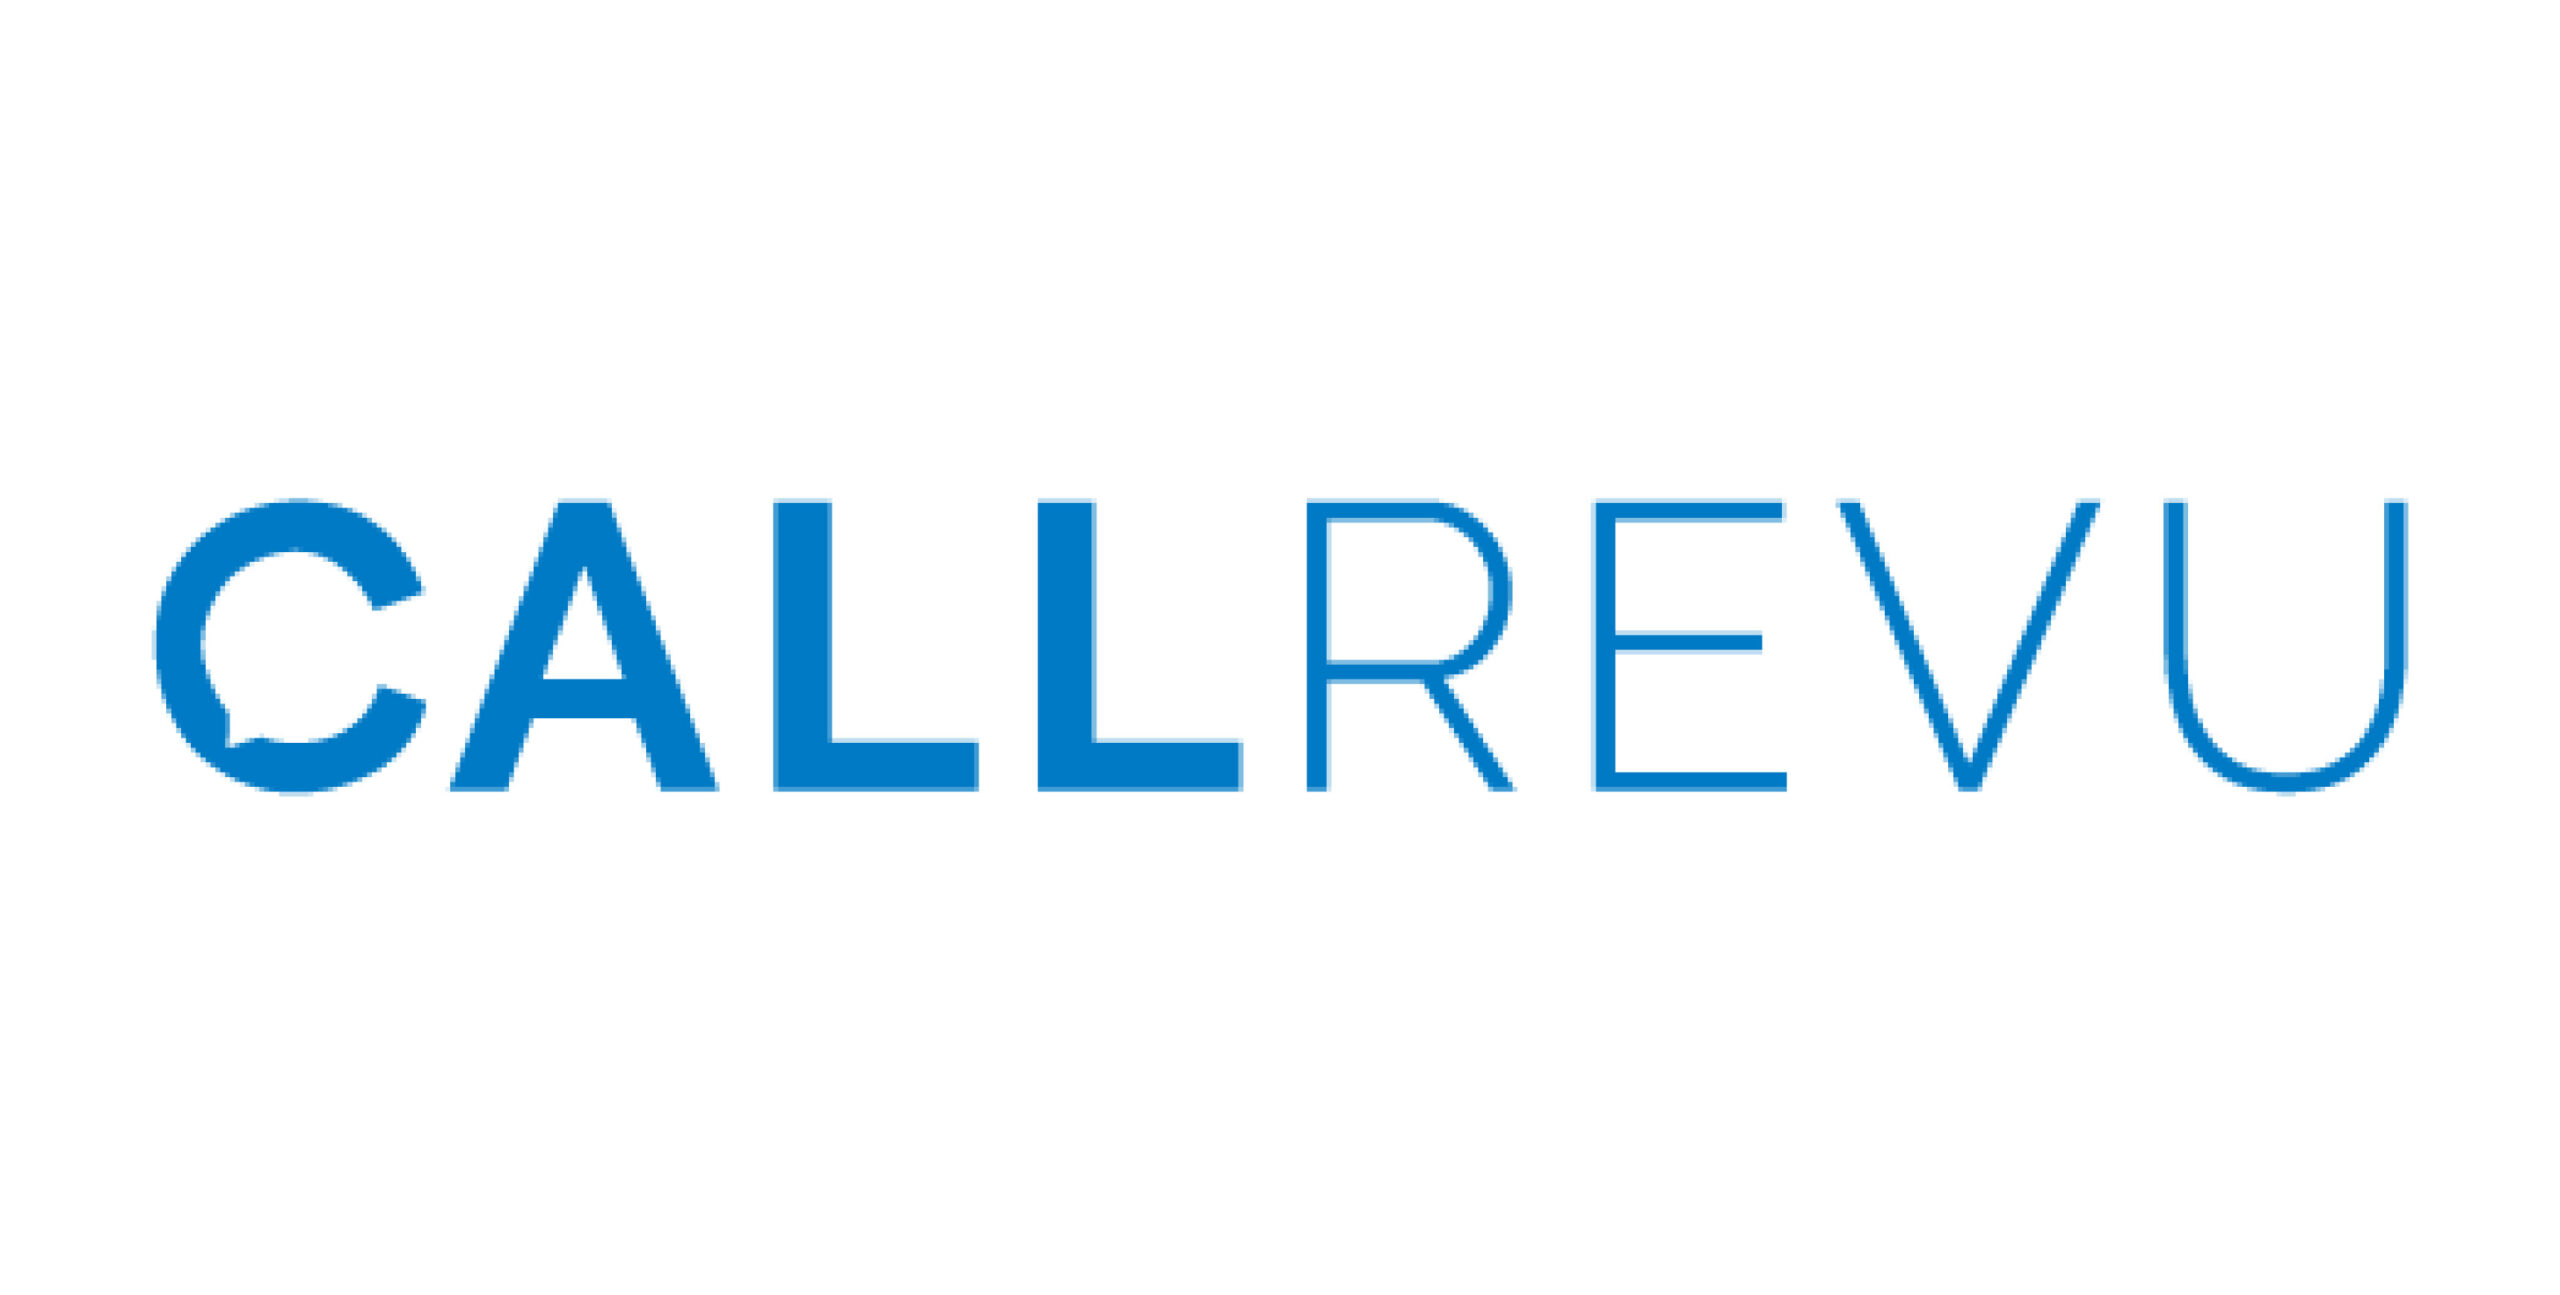 CallRevu is the industry leader for call tracking, lead management, and business analytic solutions.